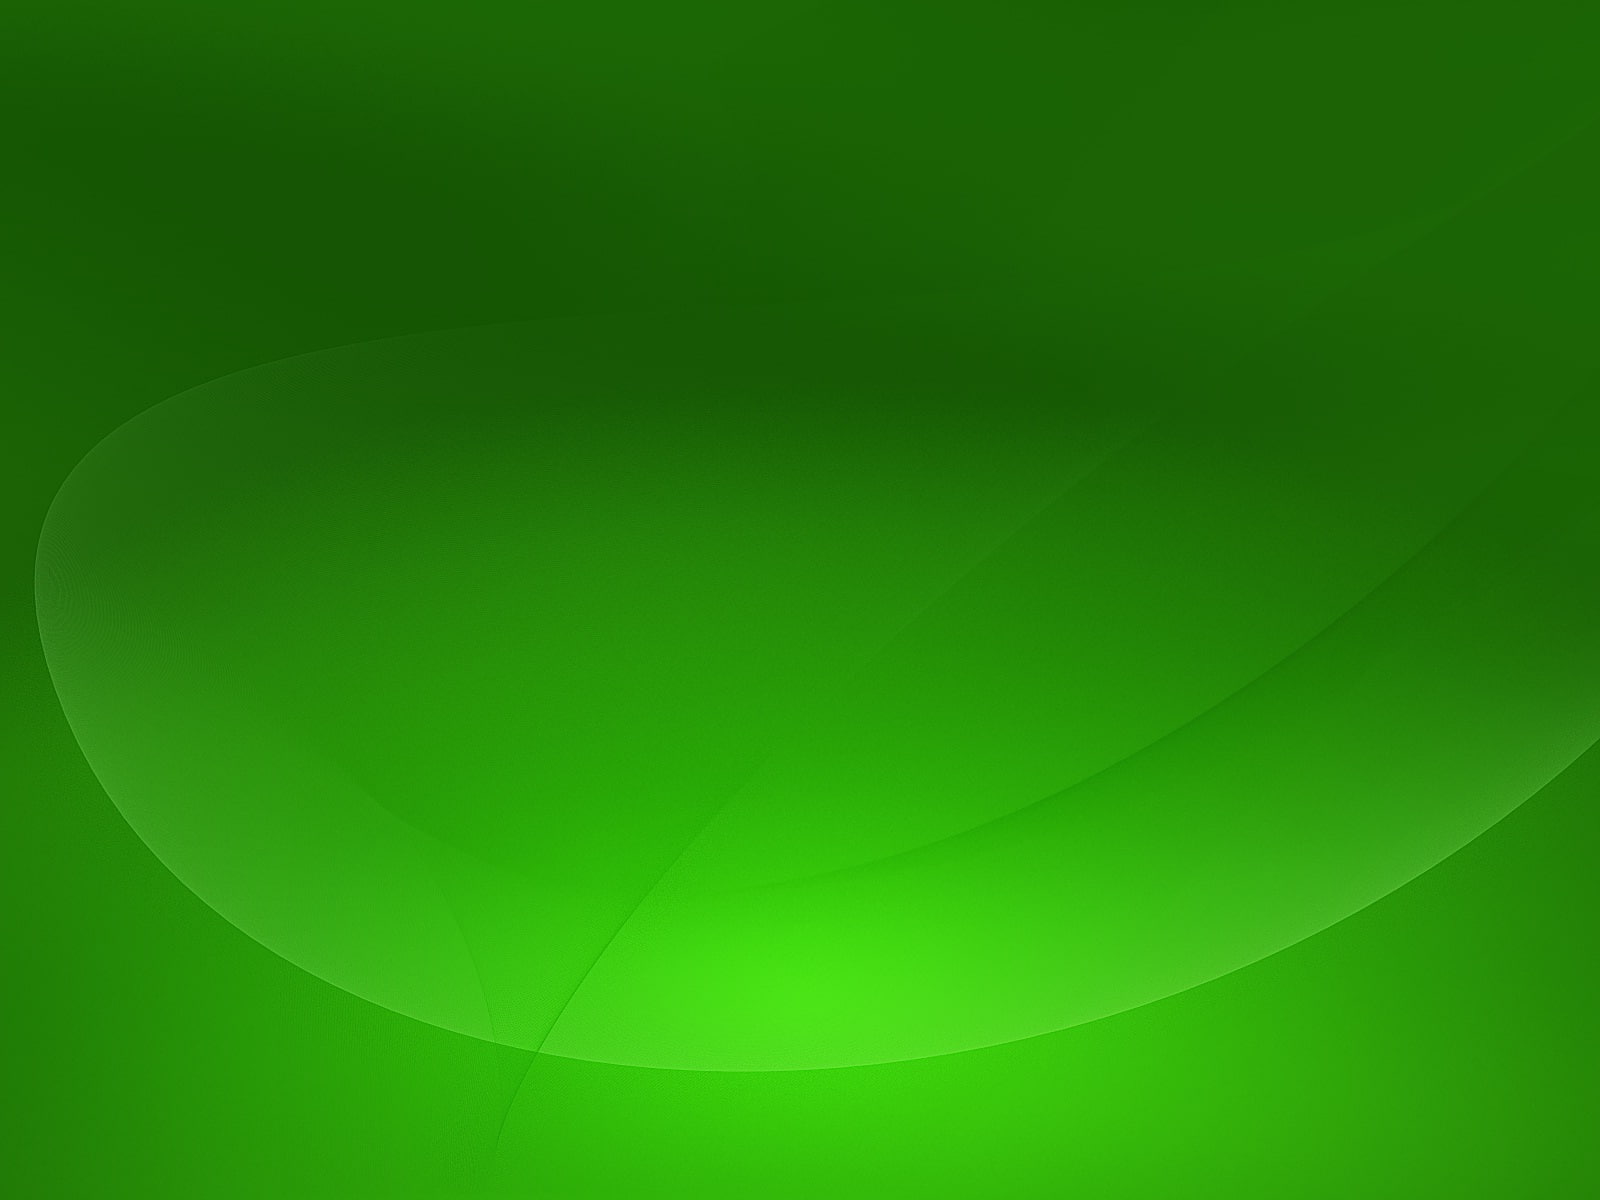 Green WOW HD, color green, abstract, 3d